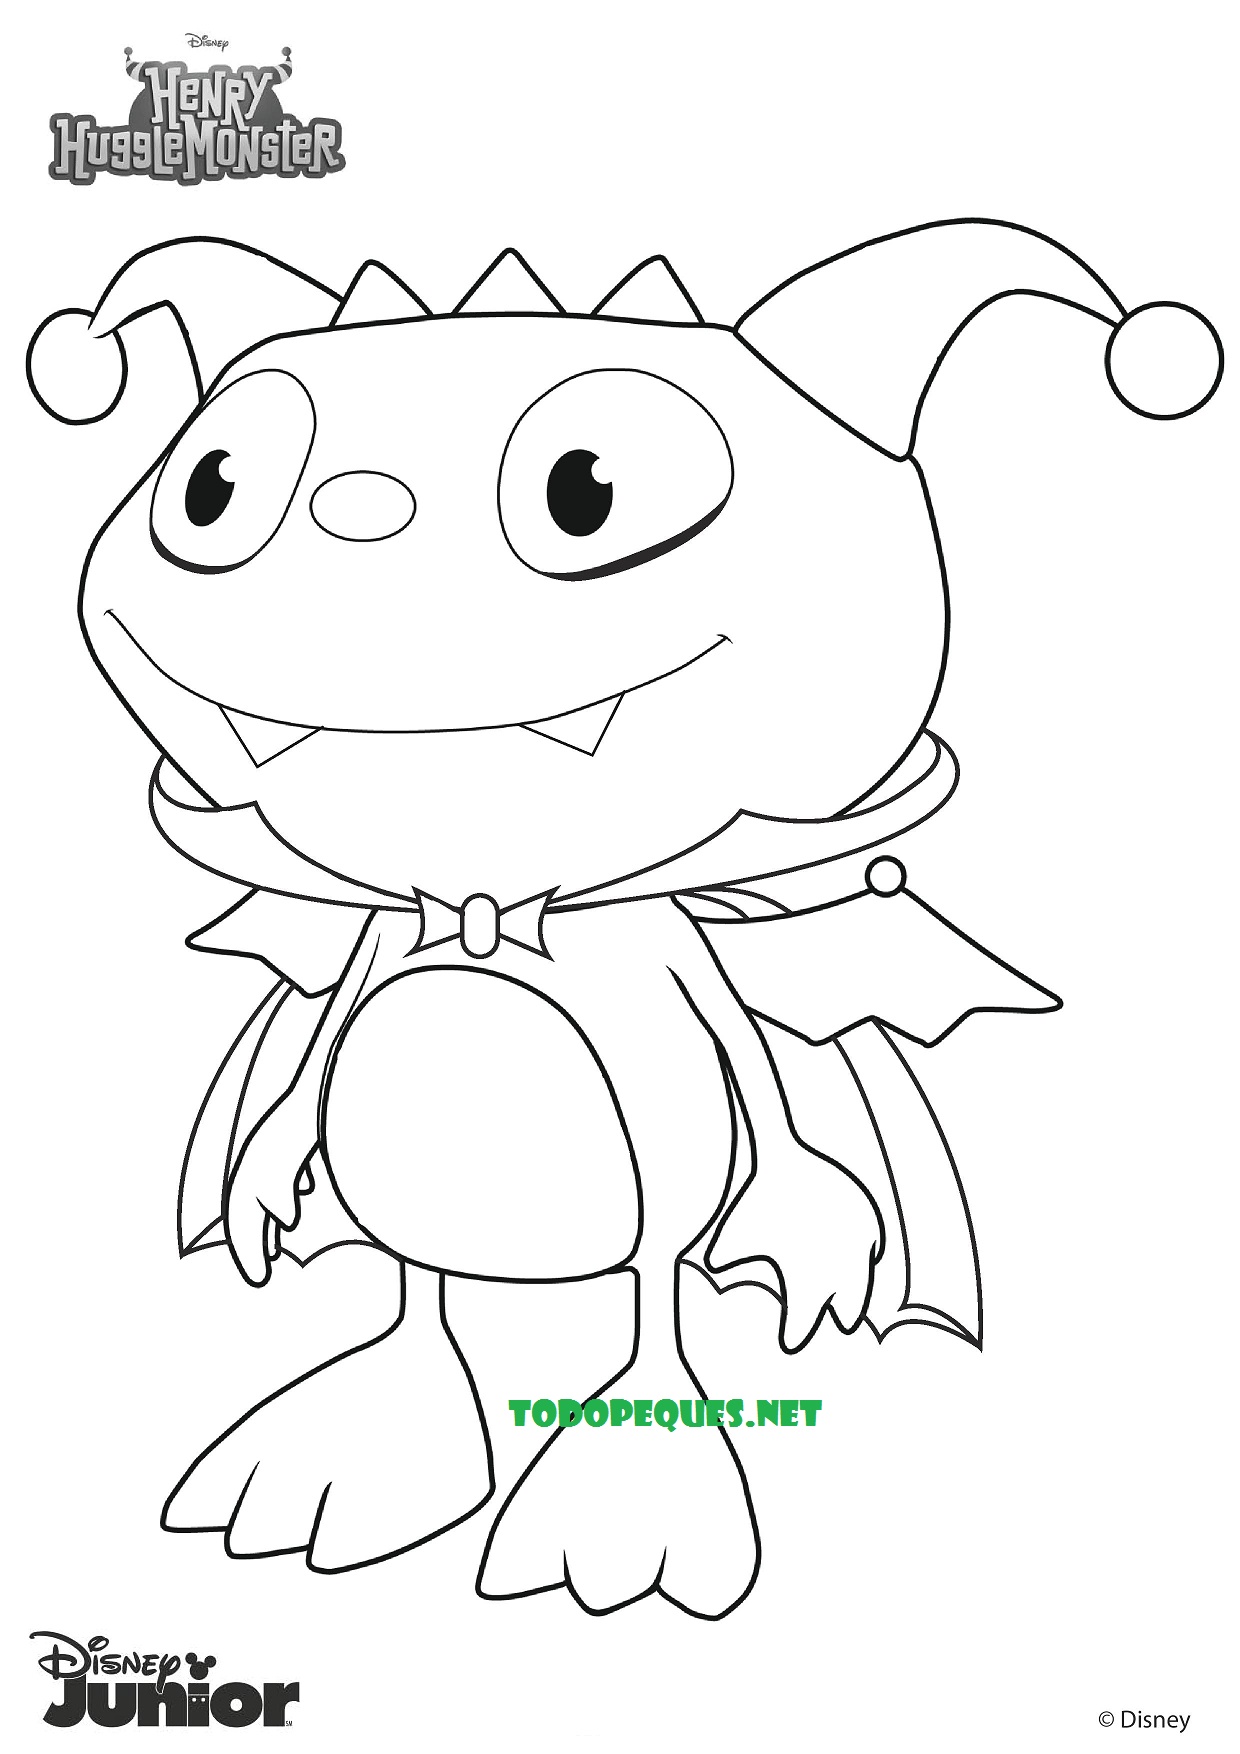 32 Henry Hugglemonster Coloring Pages - Free Printable Coloring Pages